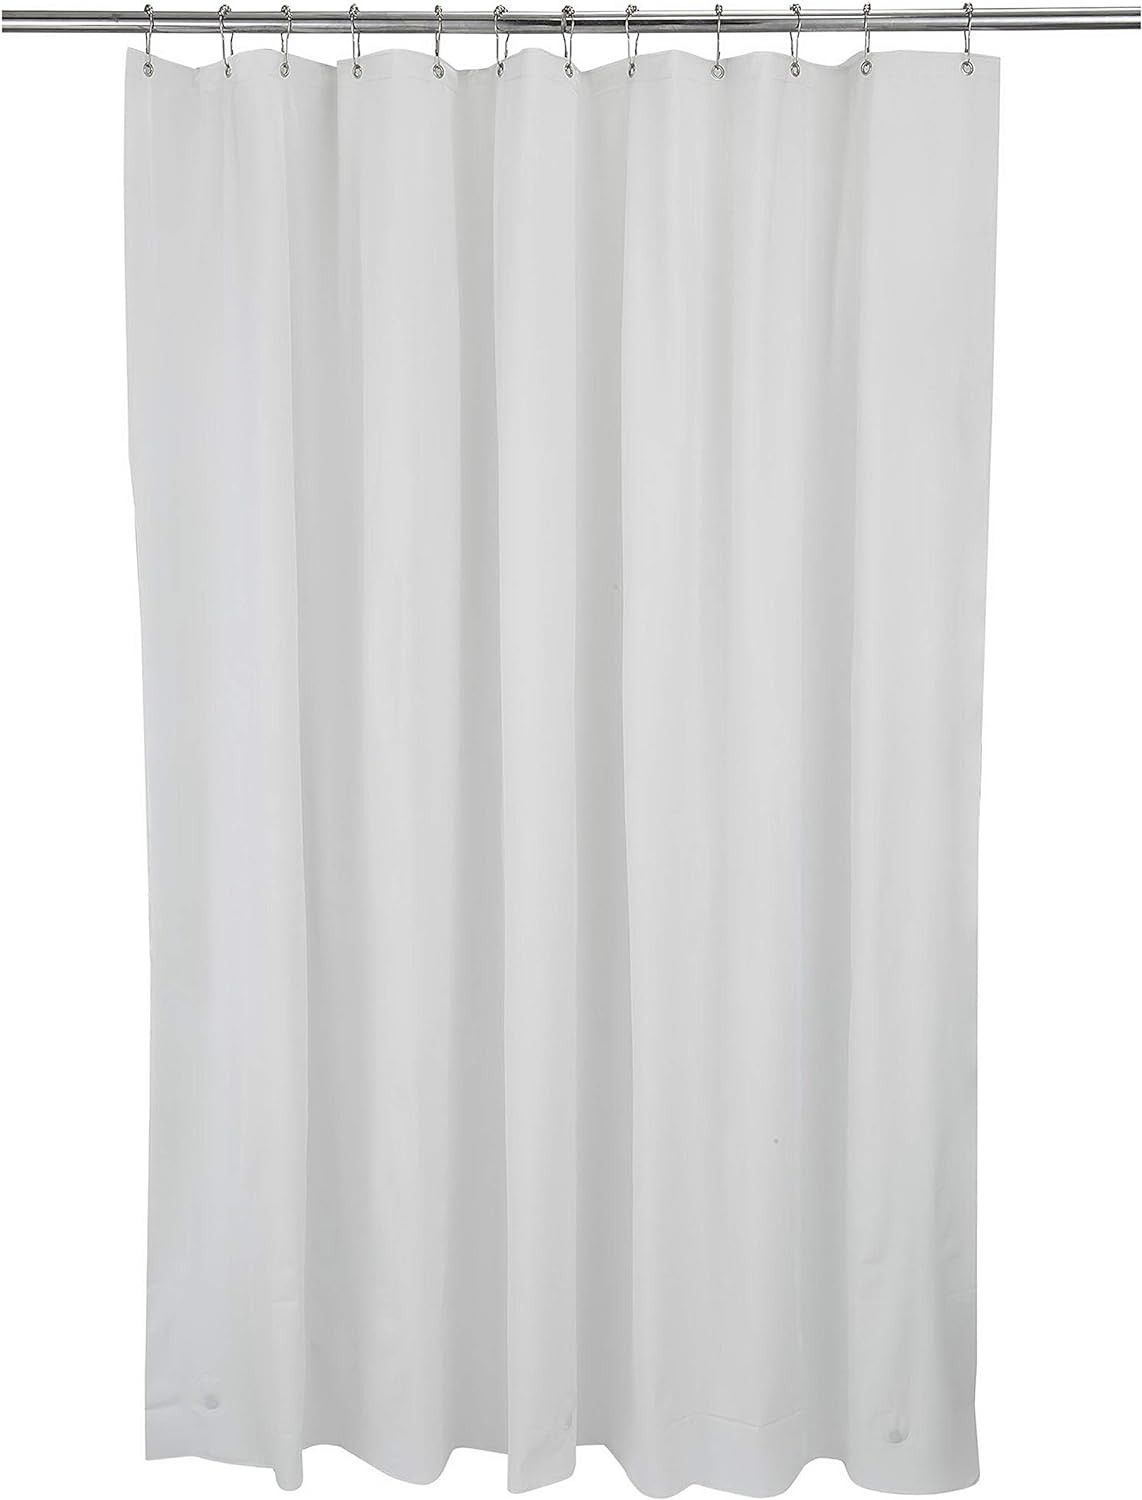 Kennedy Bath Collection Shower Curtain Liner in White